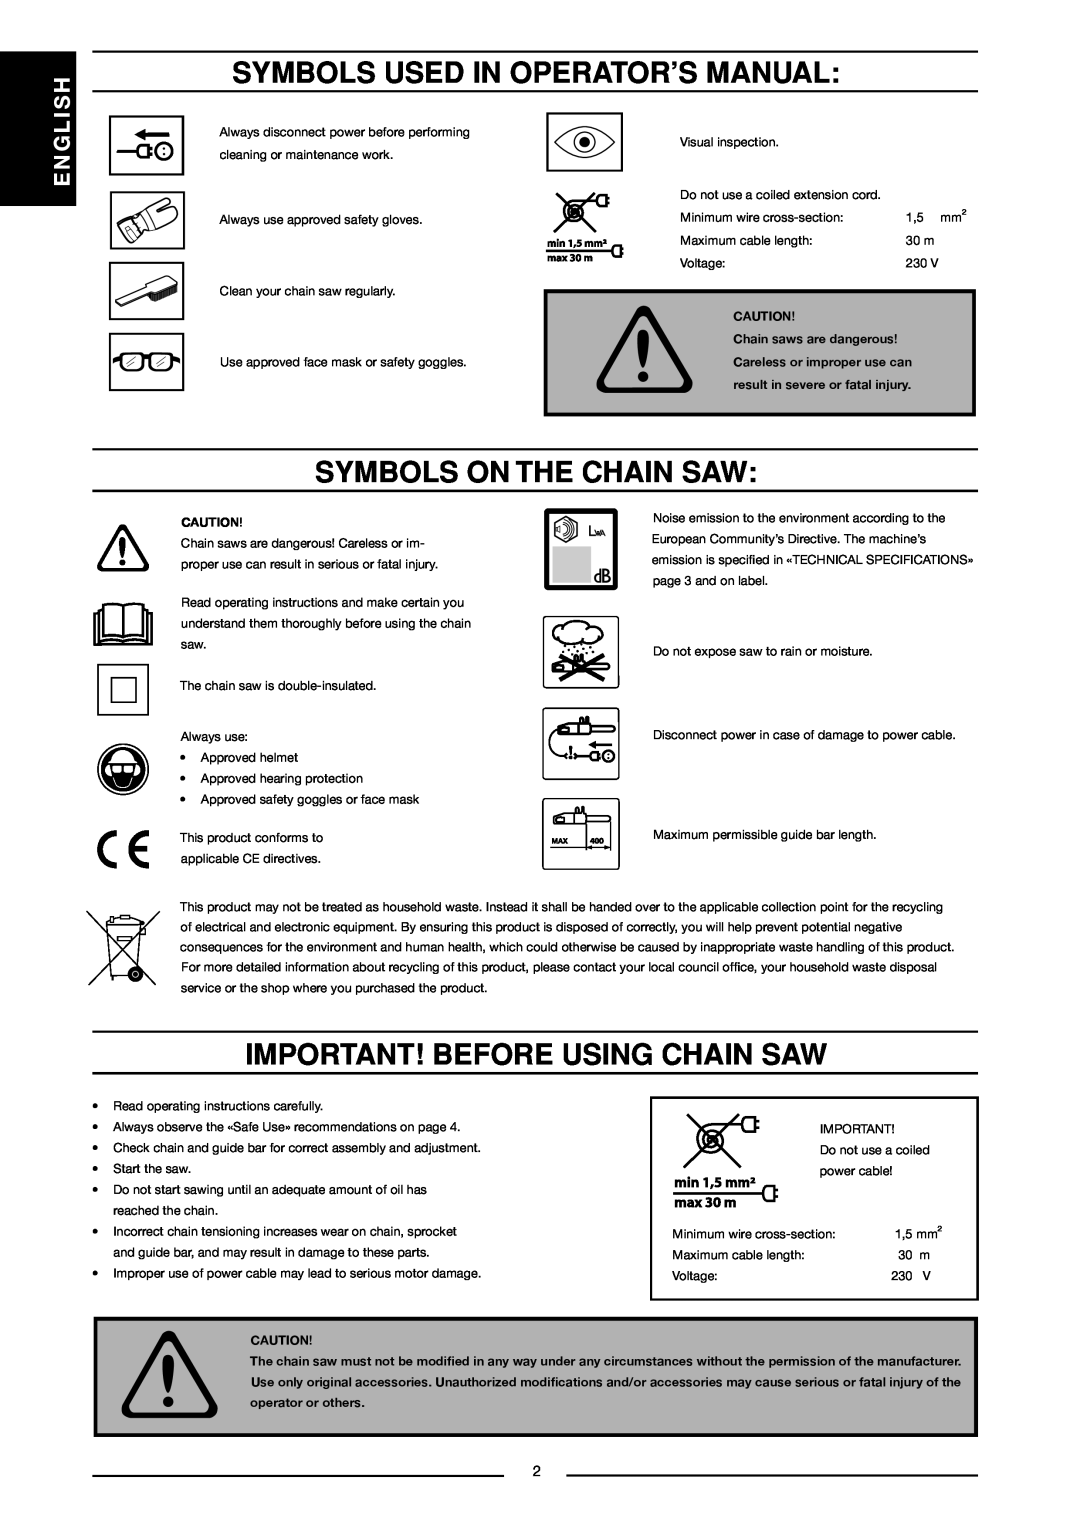 Jonsered CS 2121 EL manual Symbols Used In Operator’S Manual, Symbols On The Chain Saw, Important! Before Using Chain Saw 